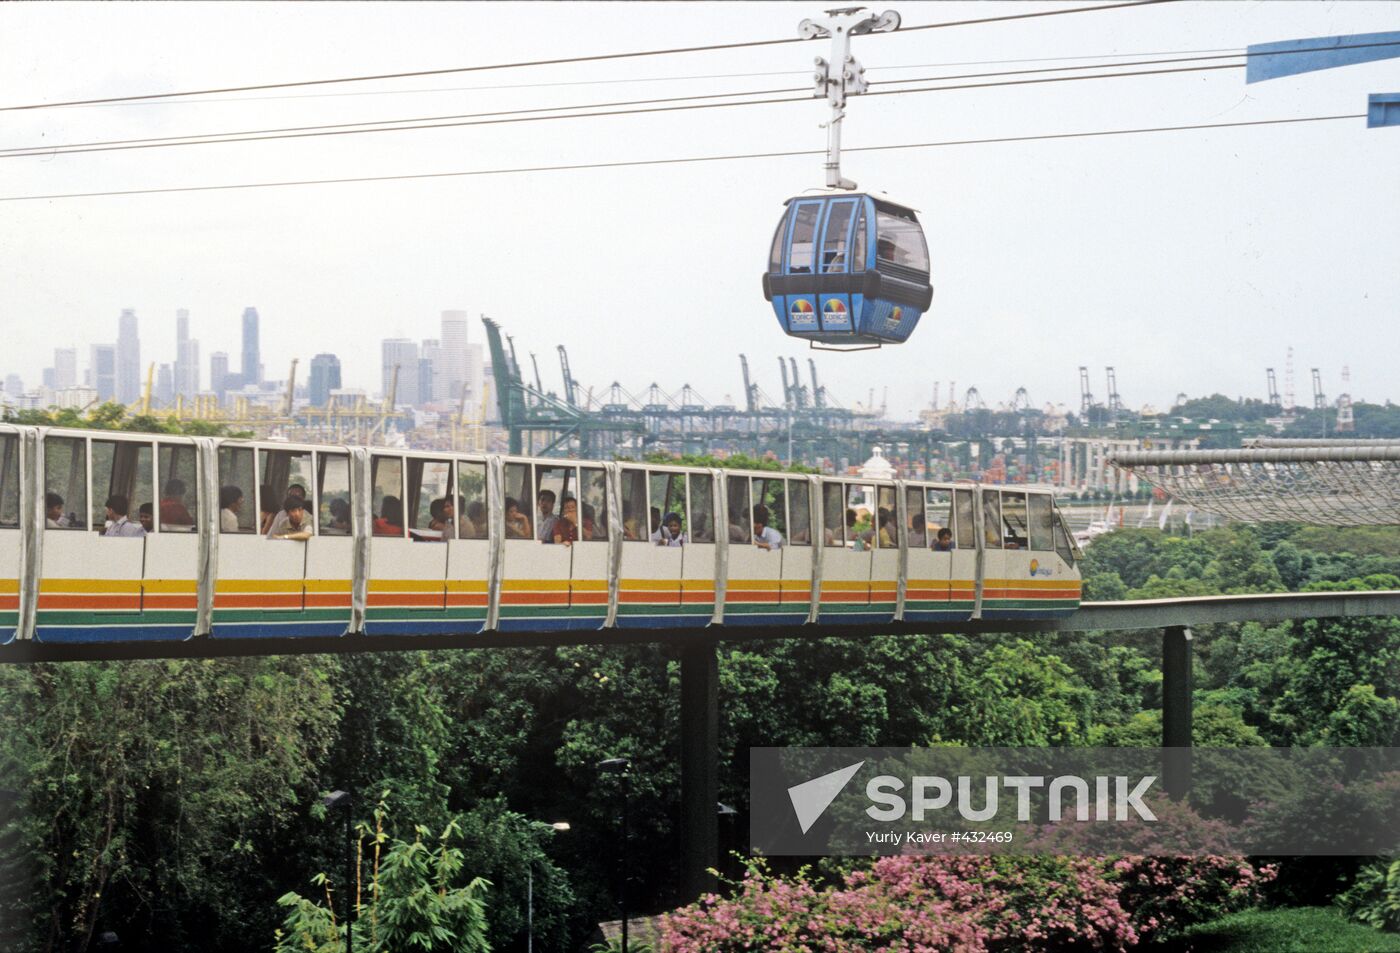 Aerial cableway and monorail